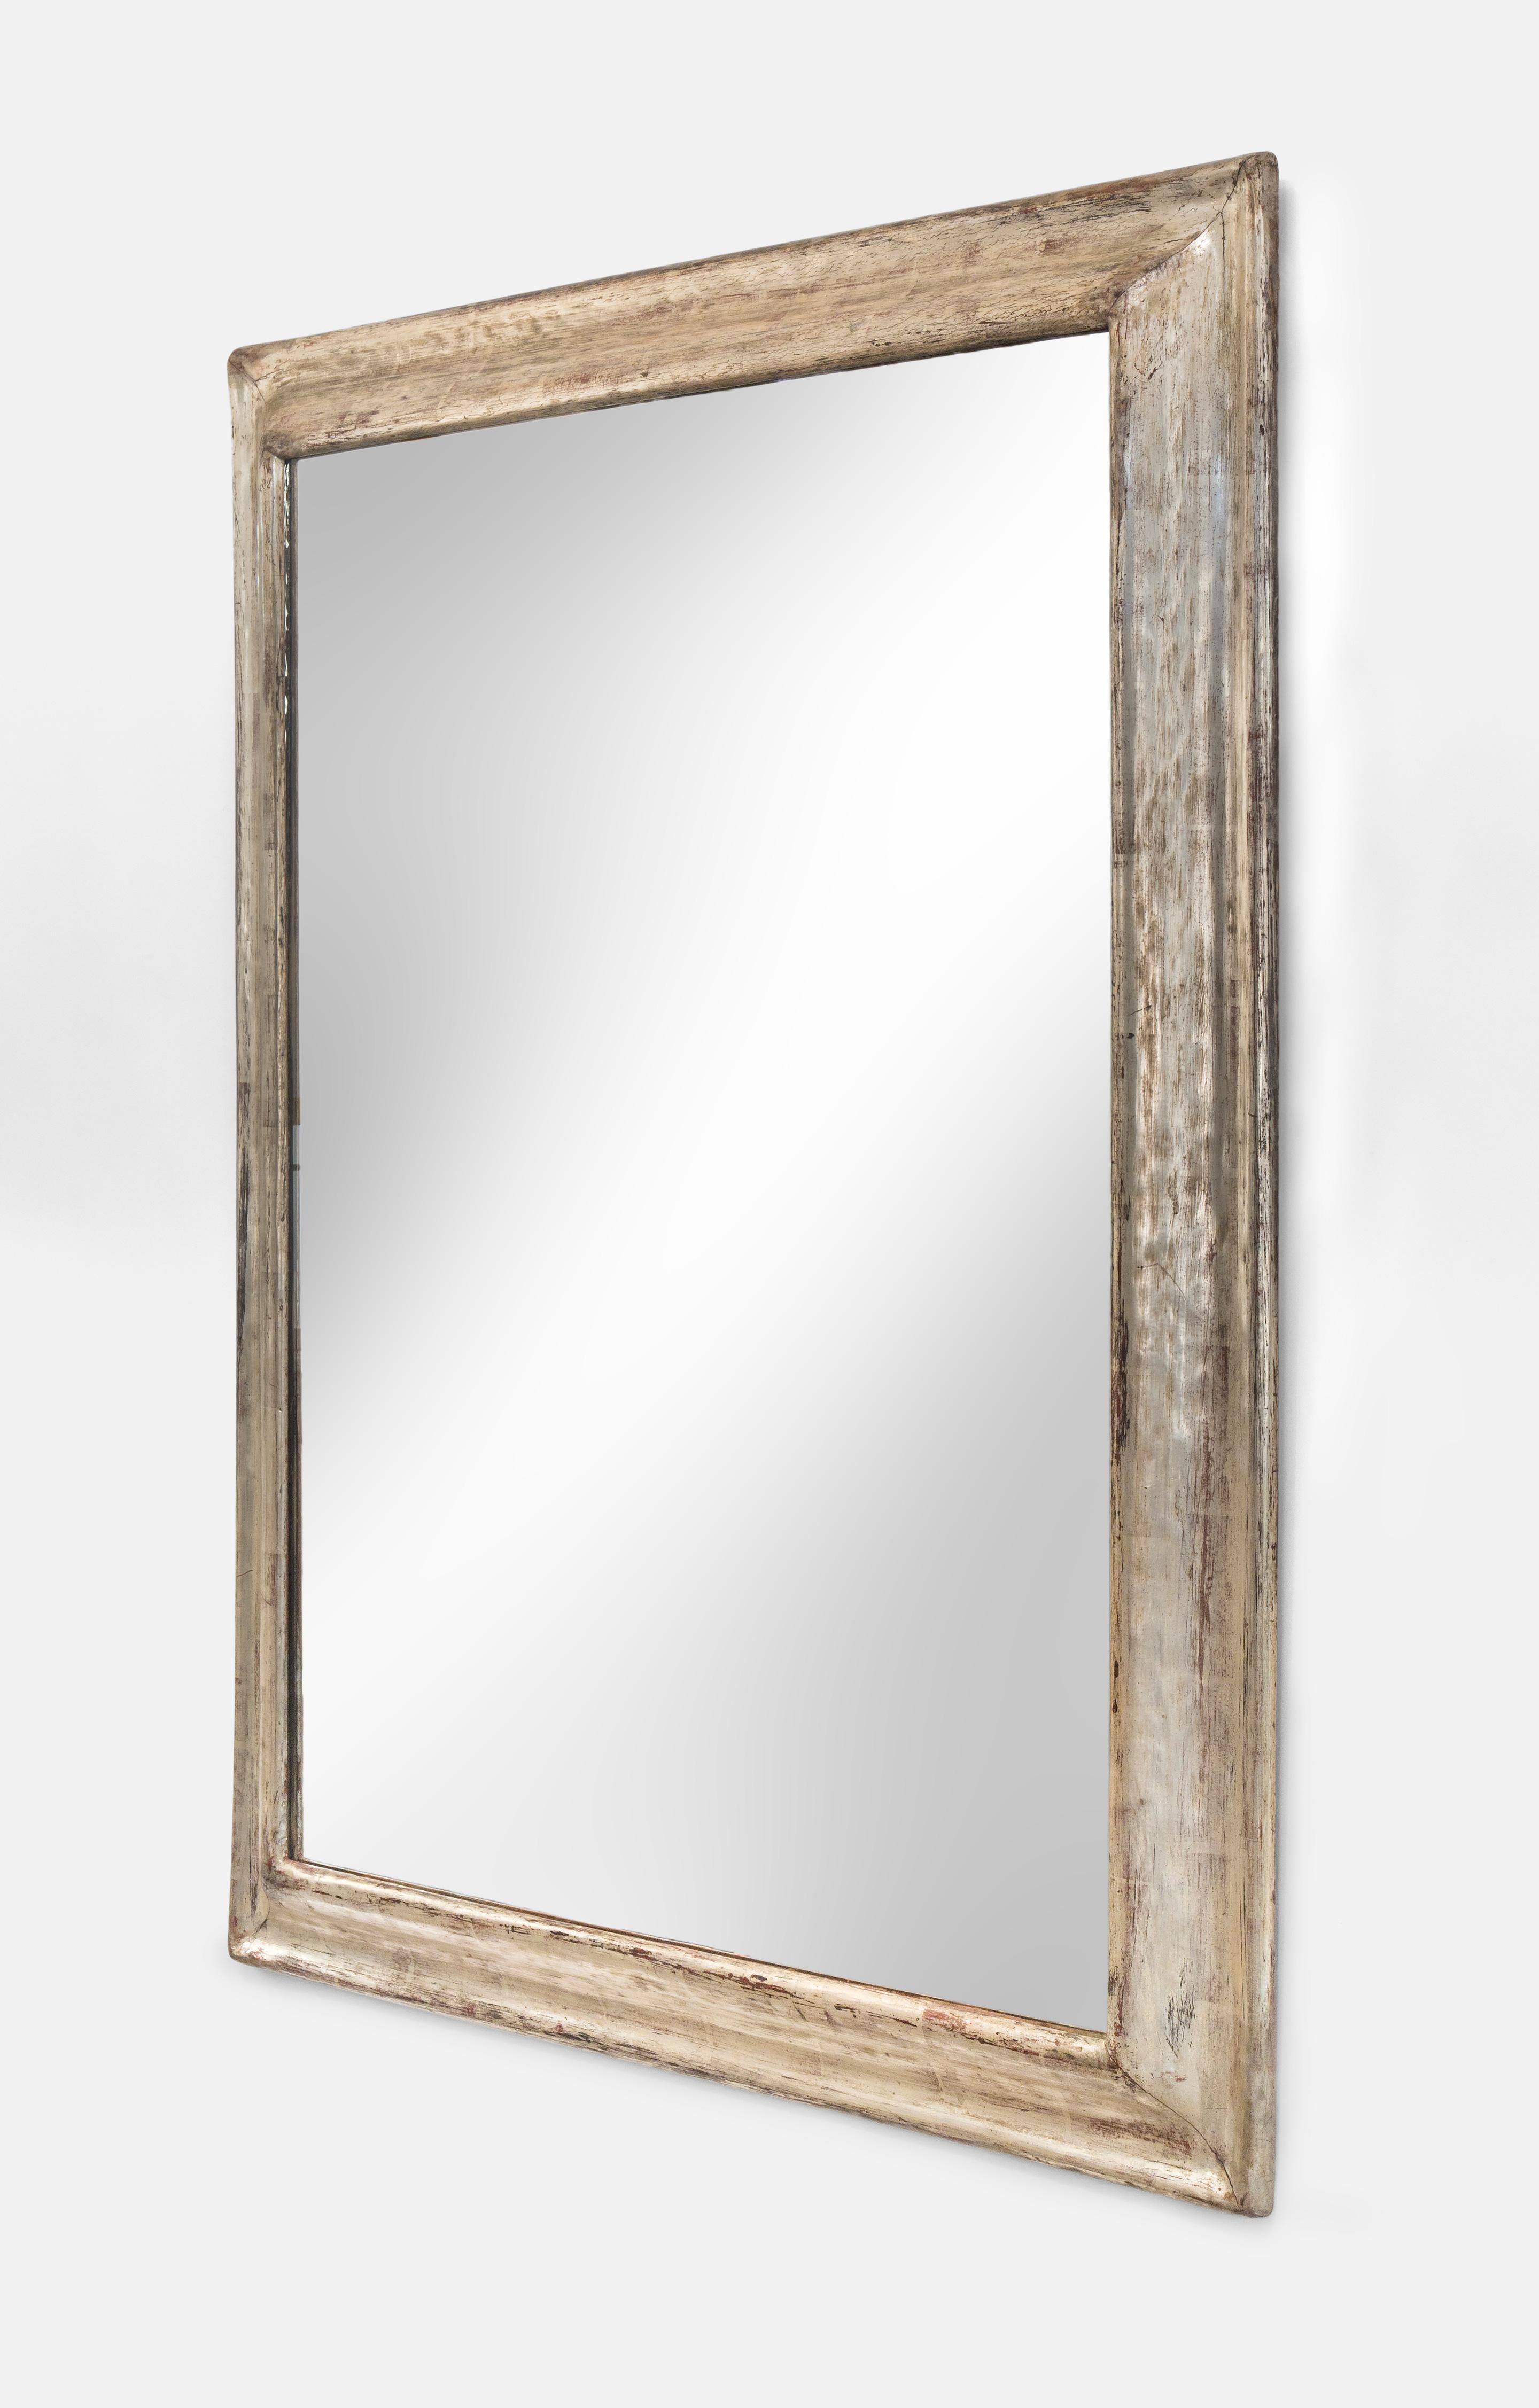 Silvered wooden frame mirror
20th century
A very pretty mirror of handsome scale; all that it reflects will look more attractive. The mirror glass within a molded wood frame with antiqued silvered finish.